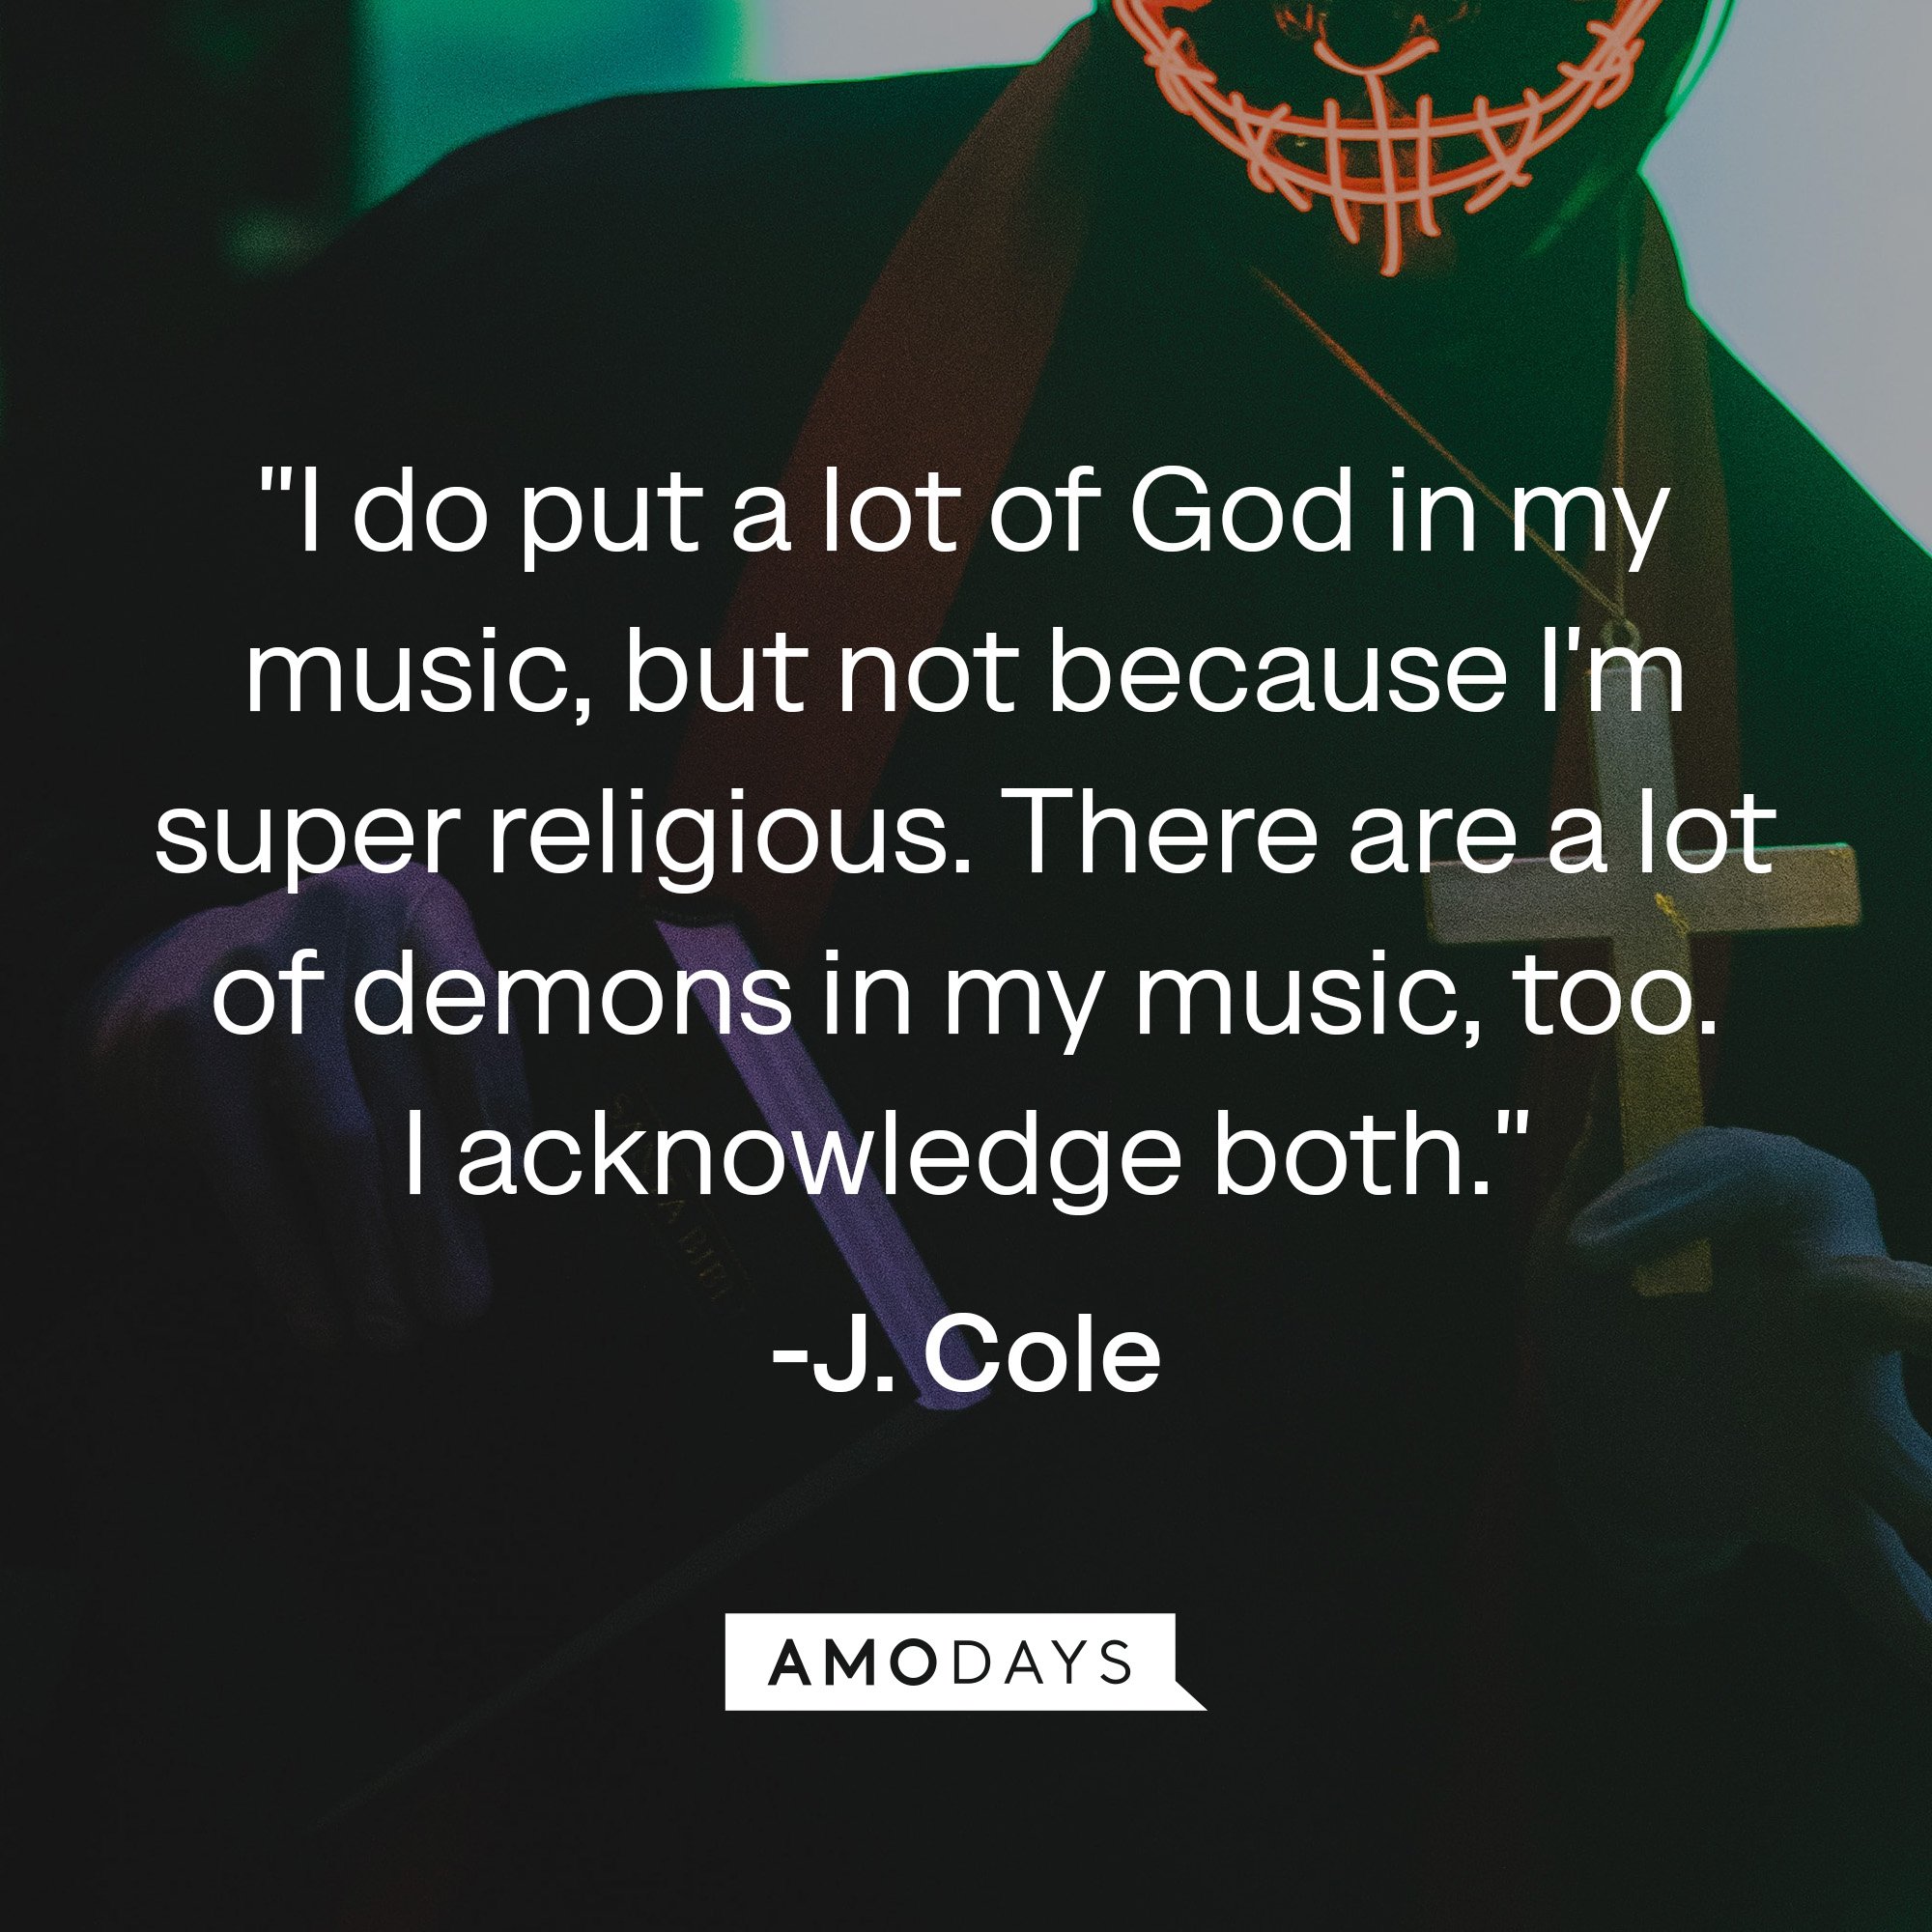 J. Cole’s quote: "I do put a lot of God in my music, but not because I'm super religious. There are a lot of demons in my music, too. I acknowledge both." | Image: AmoDays